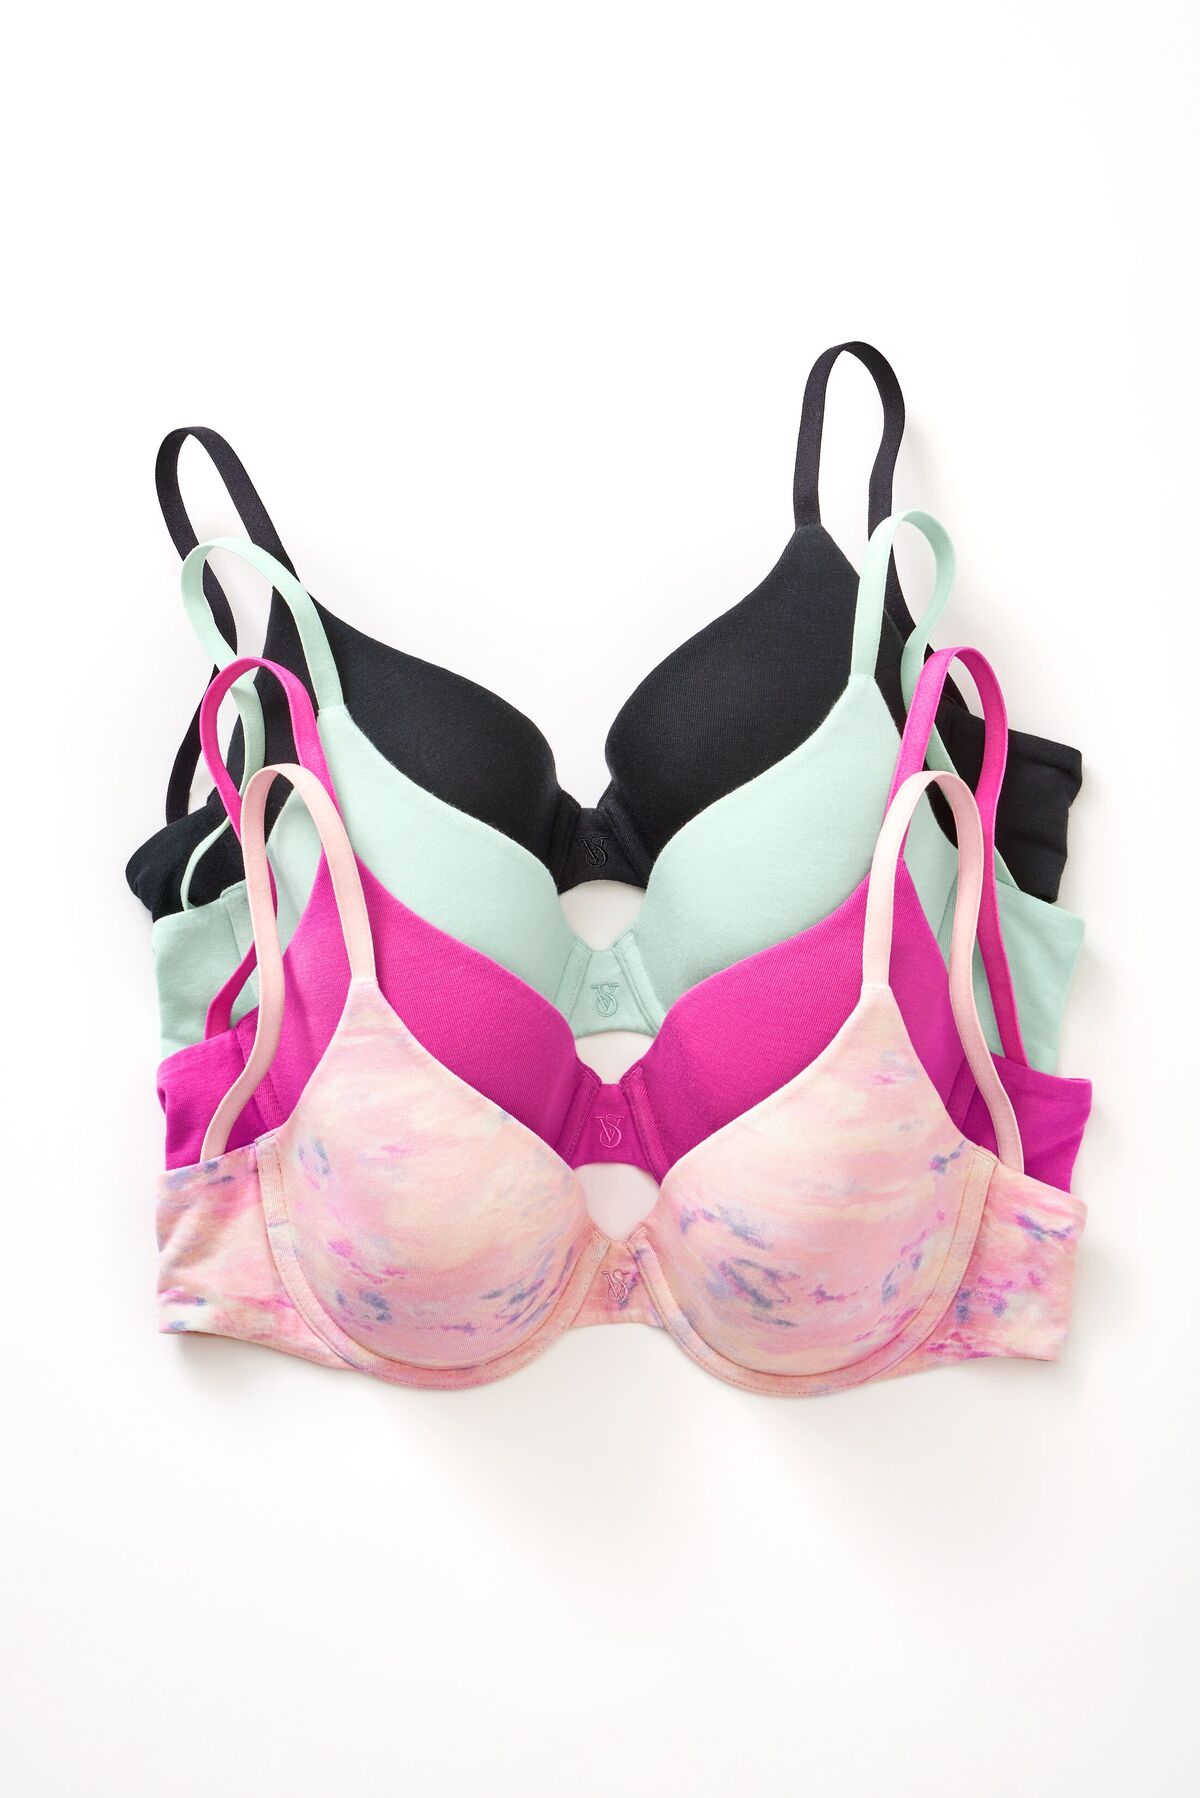 Best Victoria Secret Pink Bras! for sale in Panama City, Florida for 2024